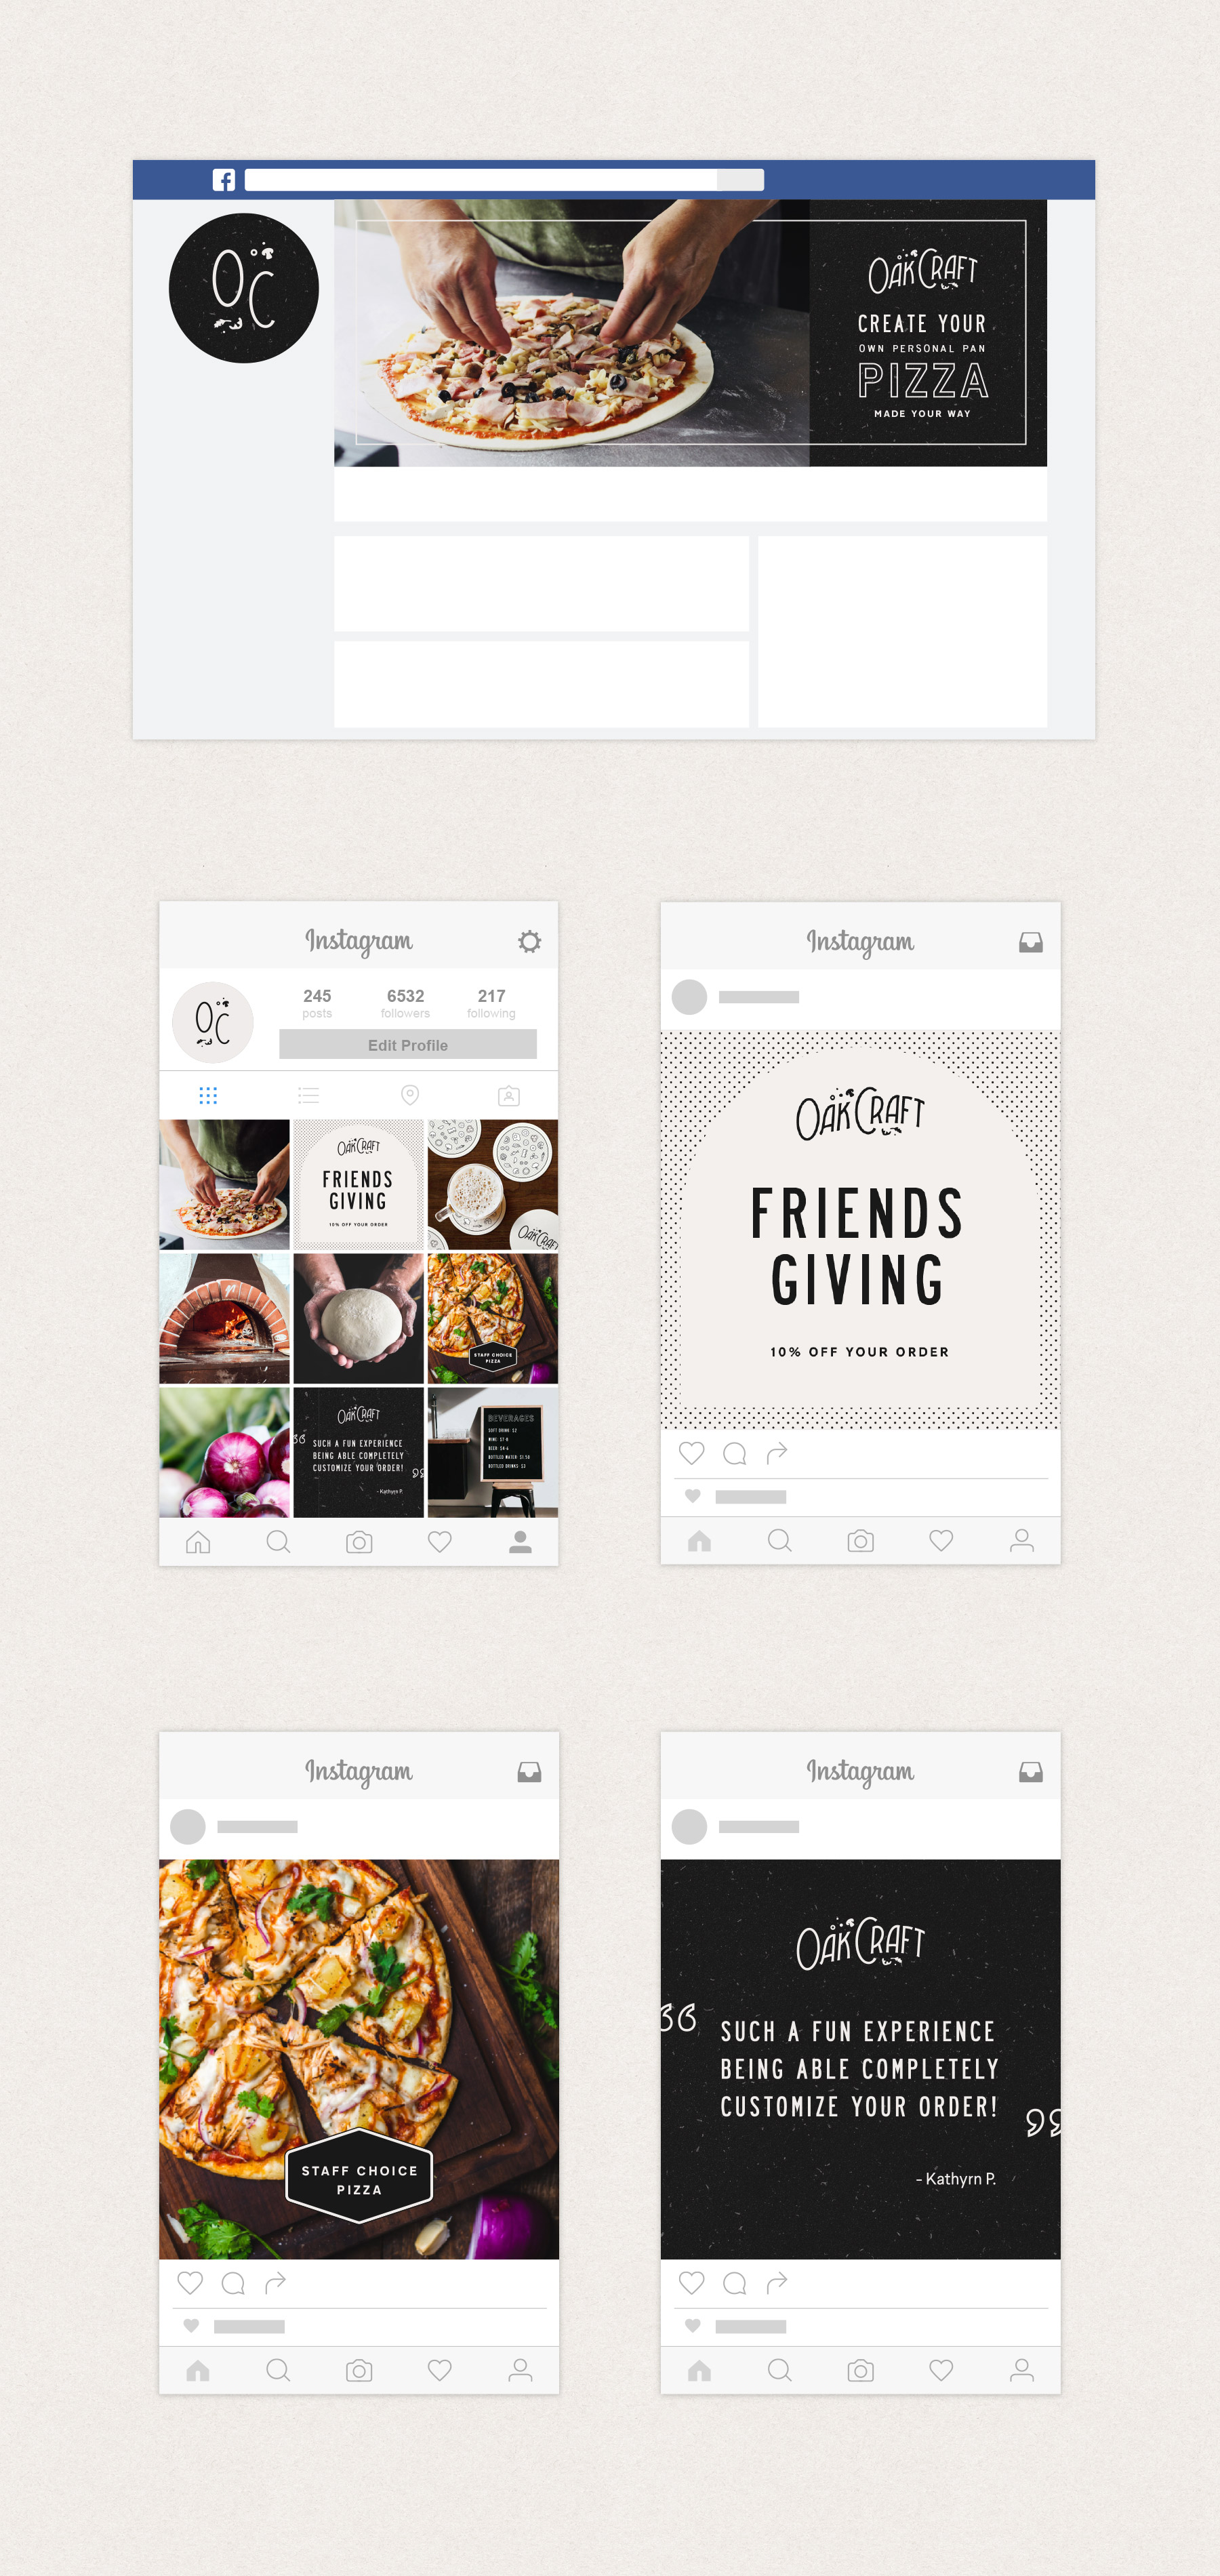 instagram designs promoting a fast casual restaurant in the pizza industry